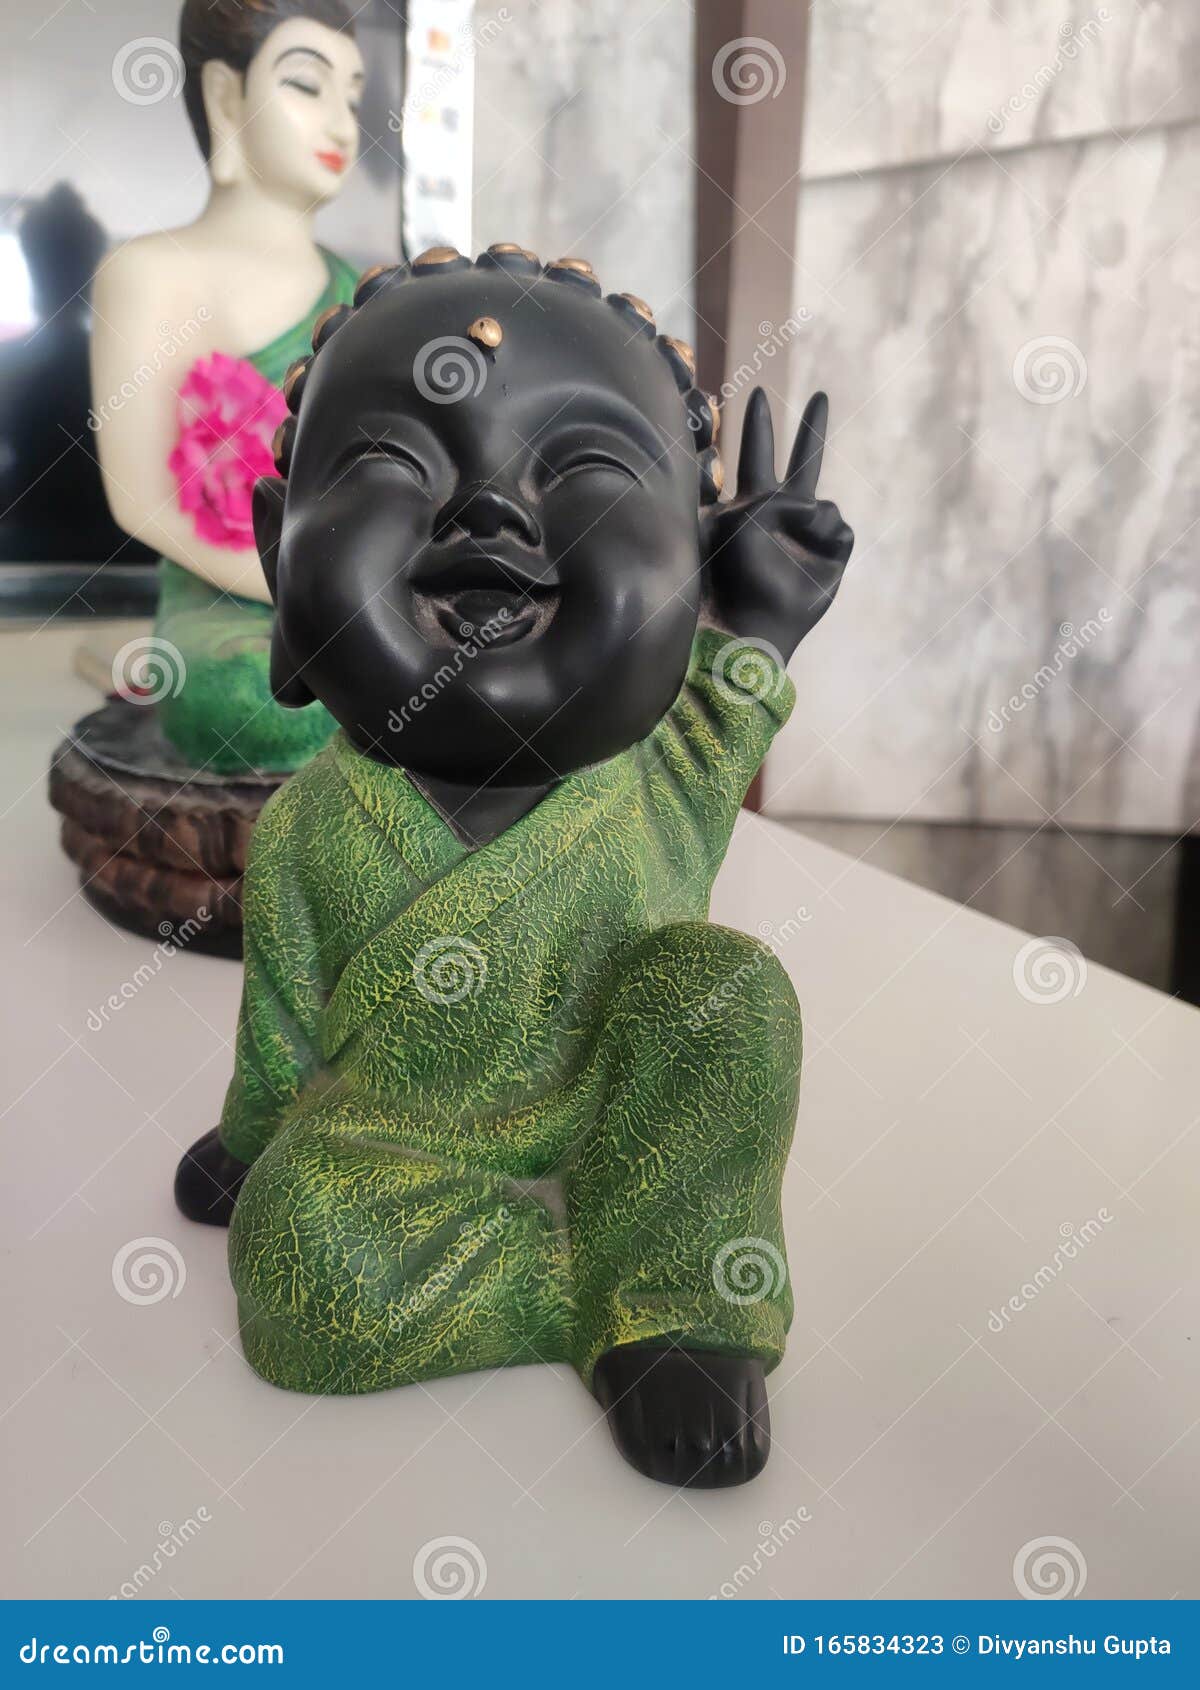 Cute Buddha Monk with Victory Sign Stock Image - Image of flowers, buddha:  165834323